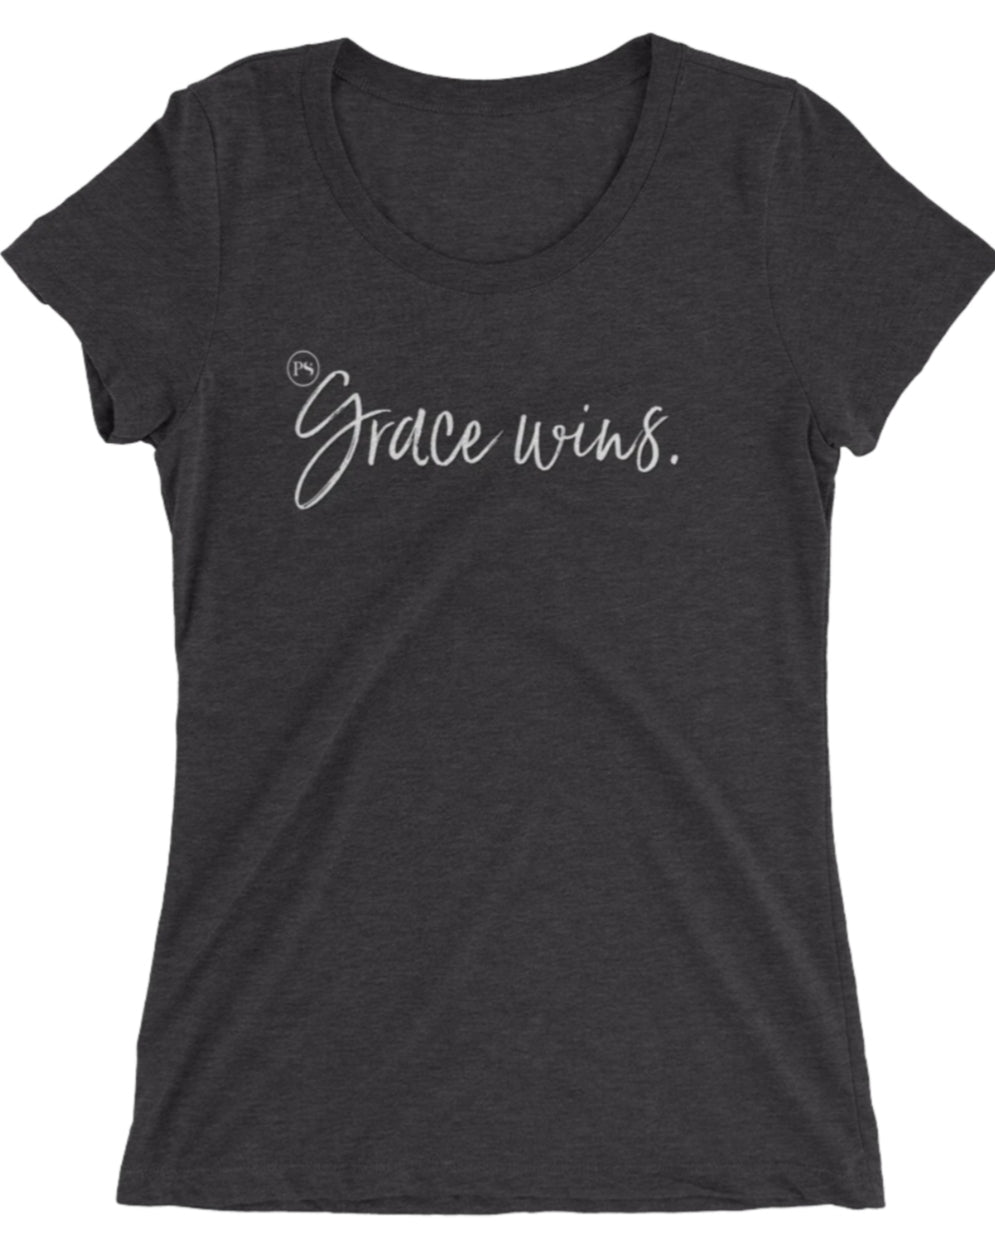 Pretty Simple Grace Wins Graphic Tee